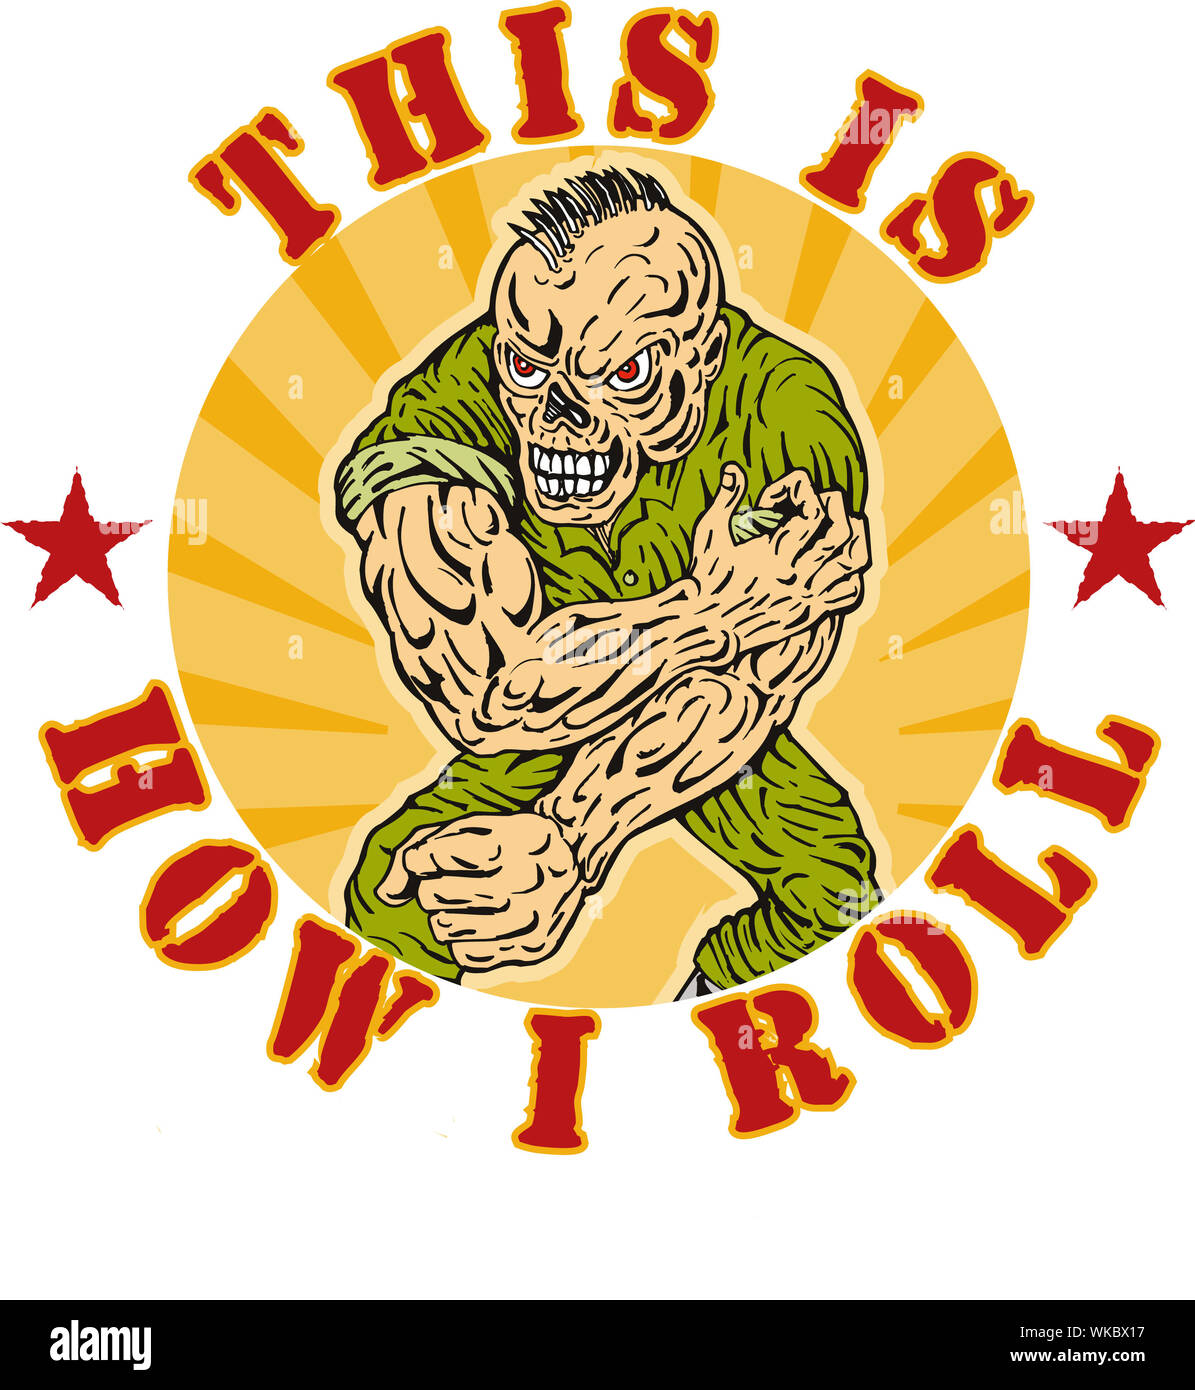 hand drawn illustration of an angry skull face army punk  with wording 'this is how i roll' Stock Photo